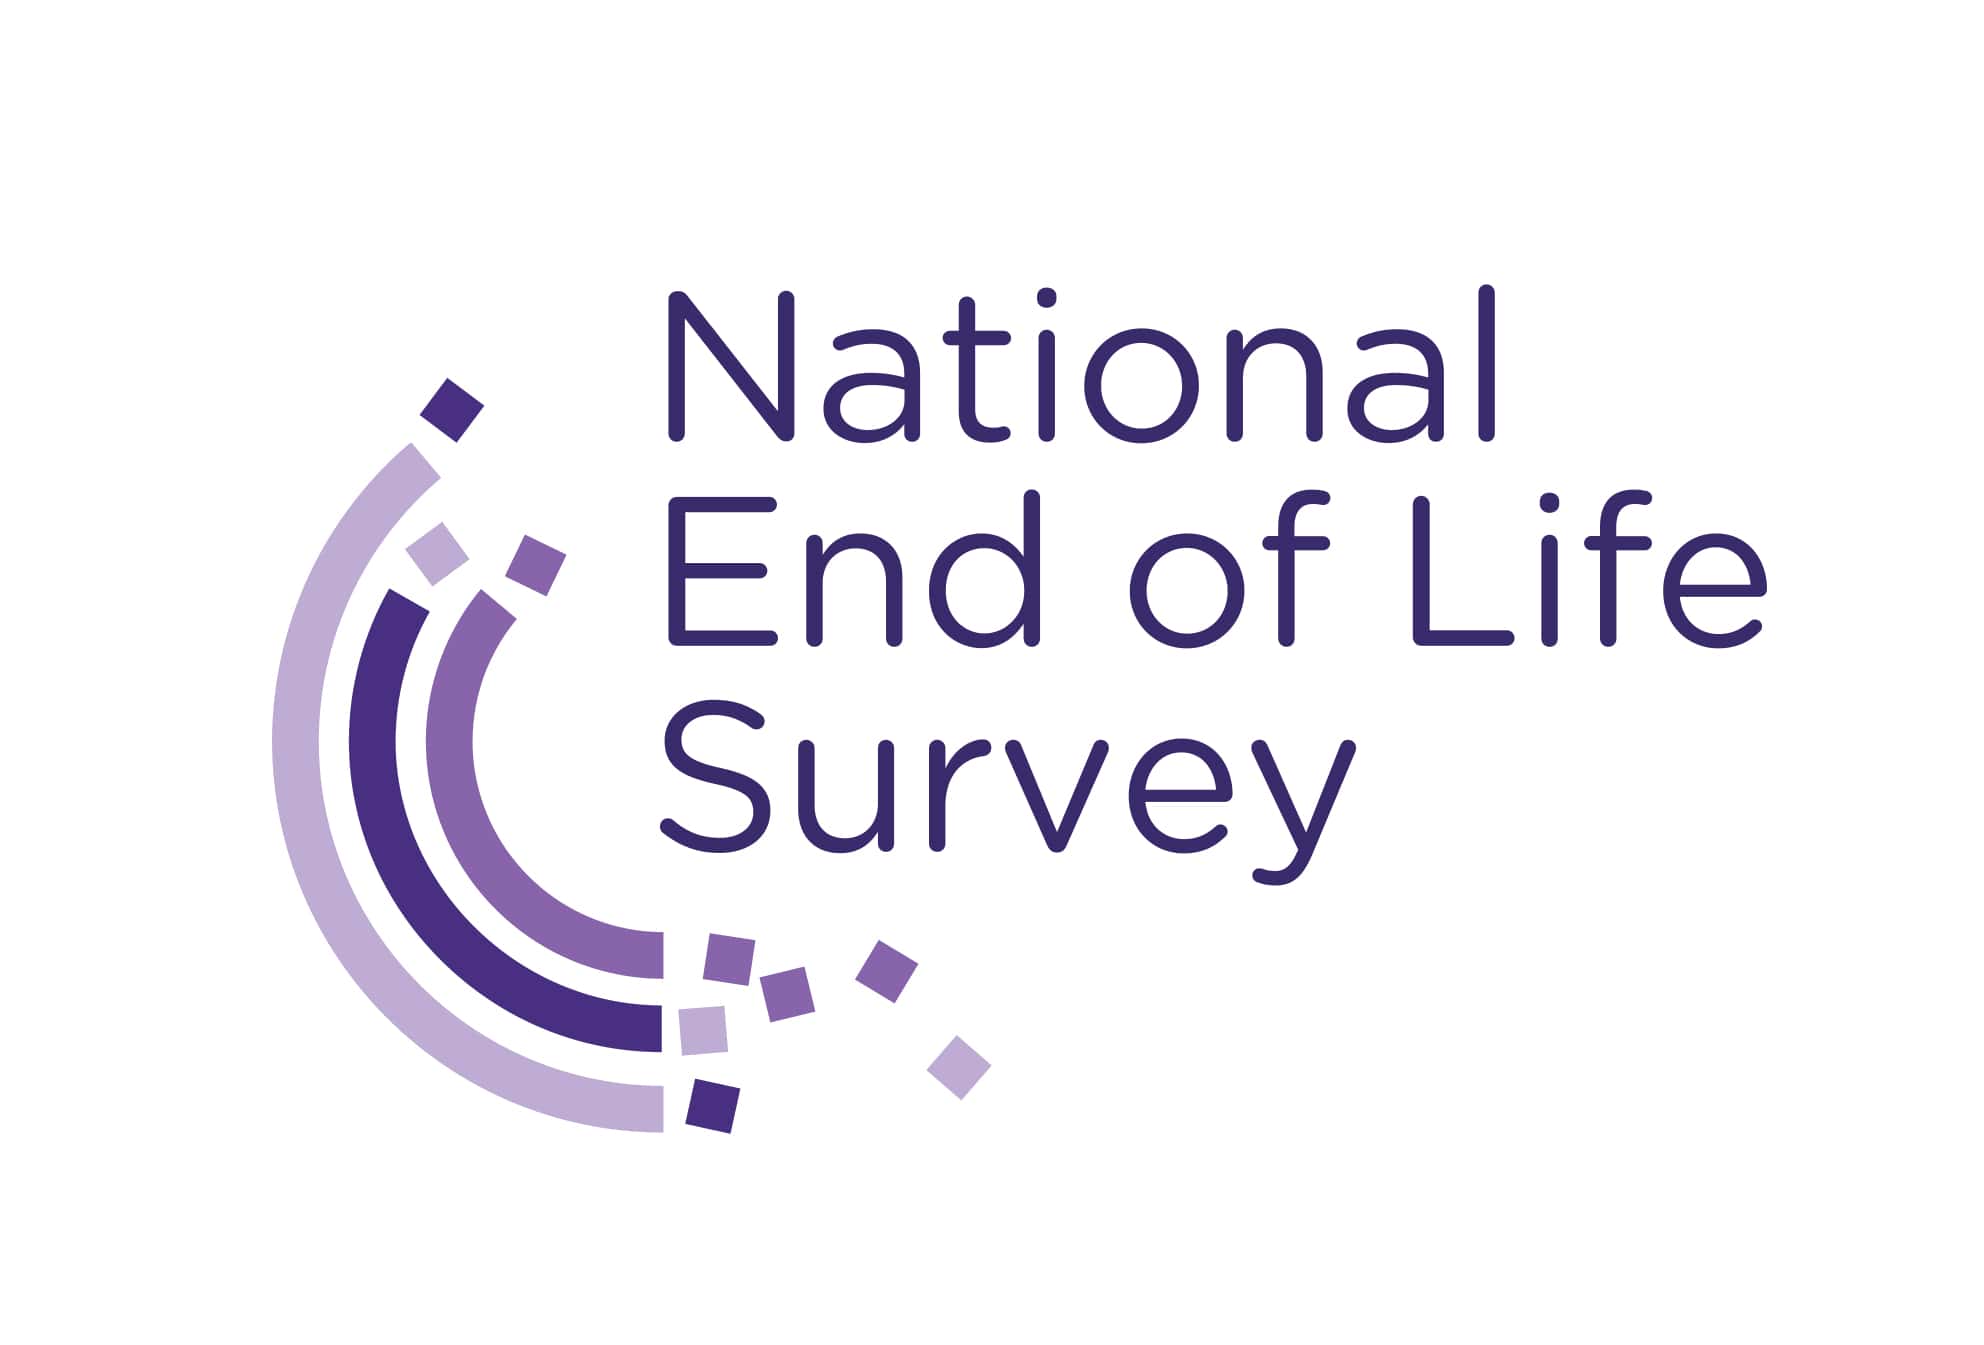 National End-of-life Experience Survey